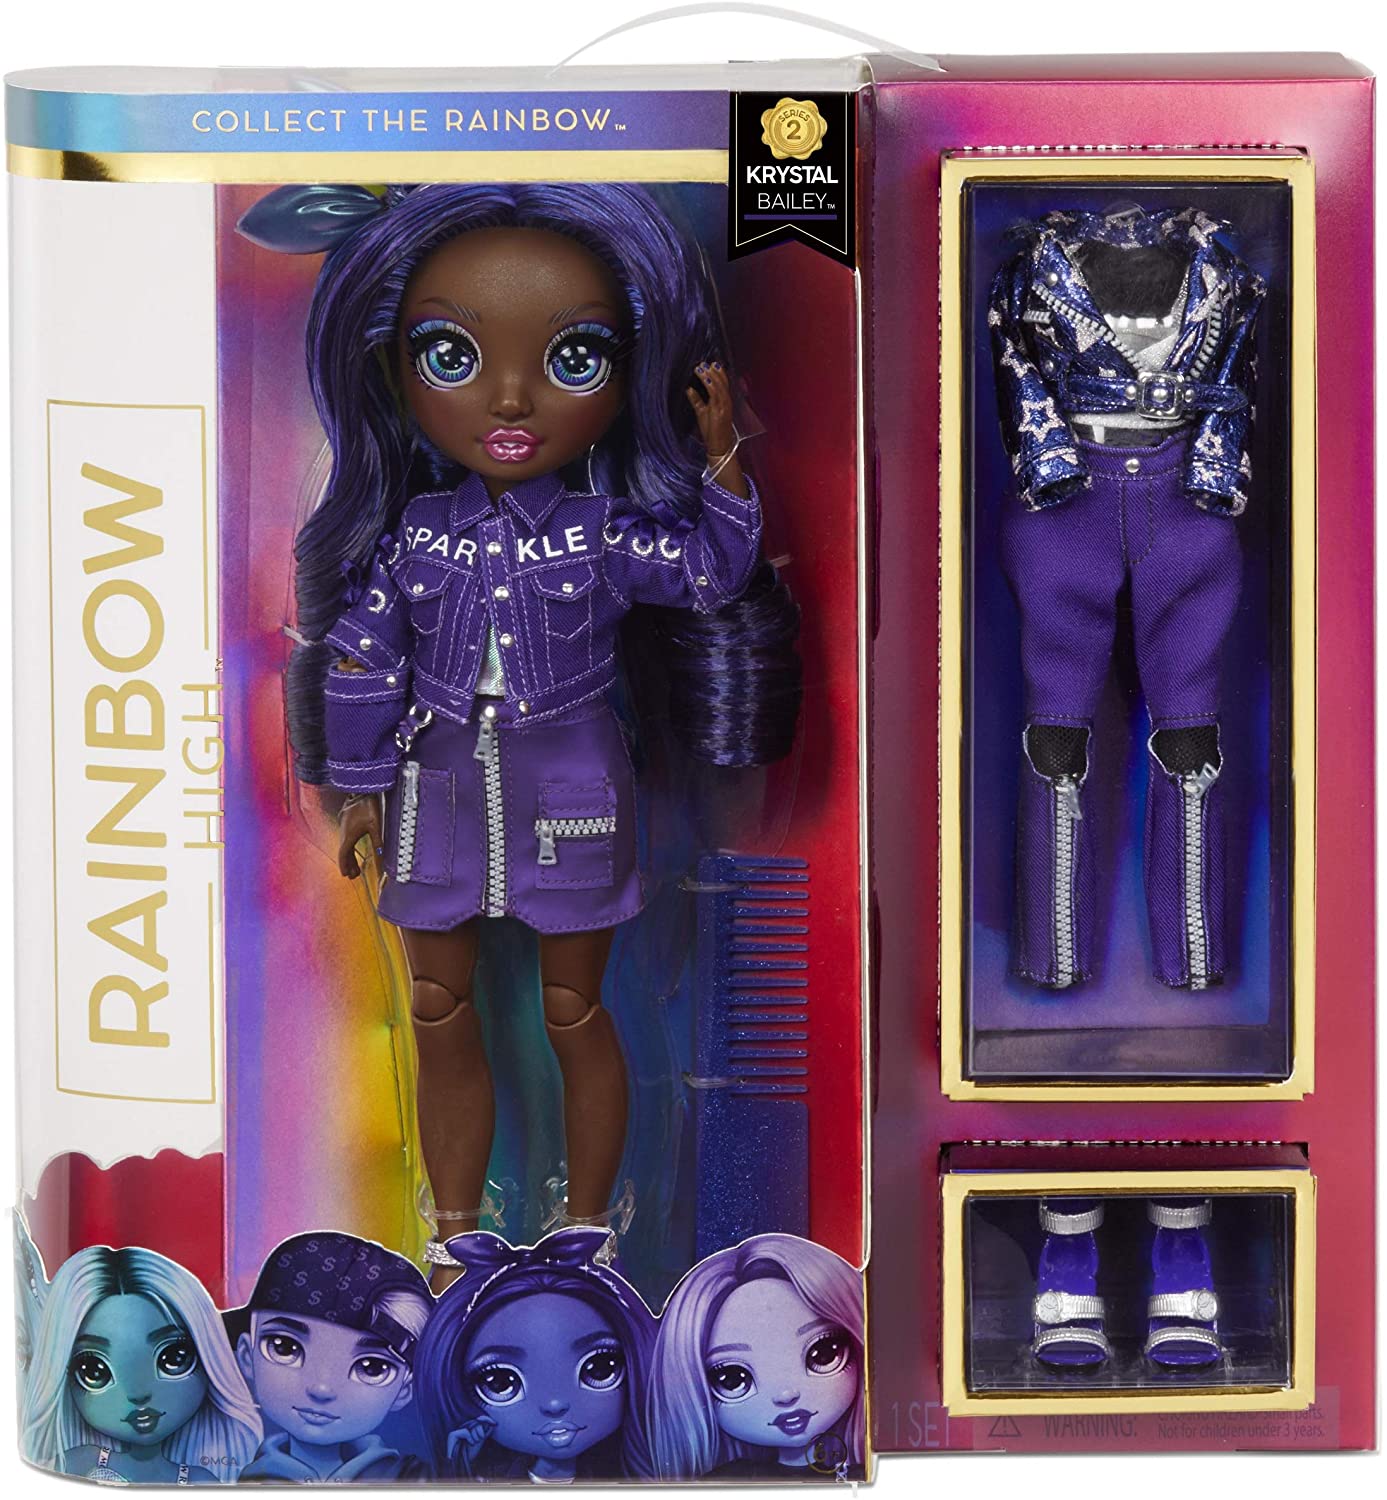 Rainbow High Krystal Bailey – Indigo (Dark Purple) Fashion Doll with 2 Outfits to Mix & Match and Doll Accessories